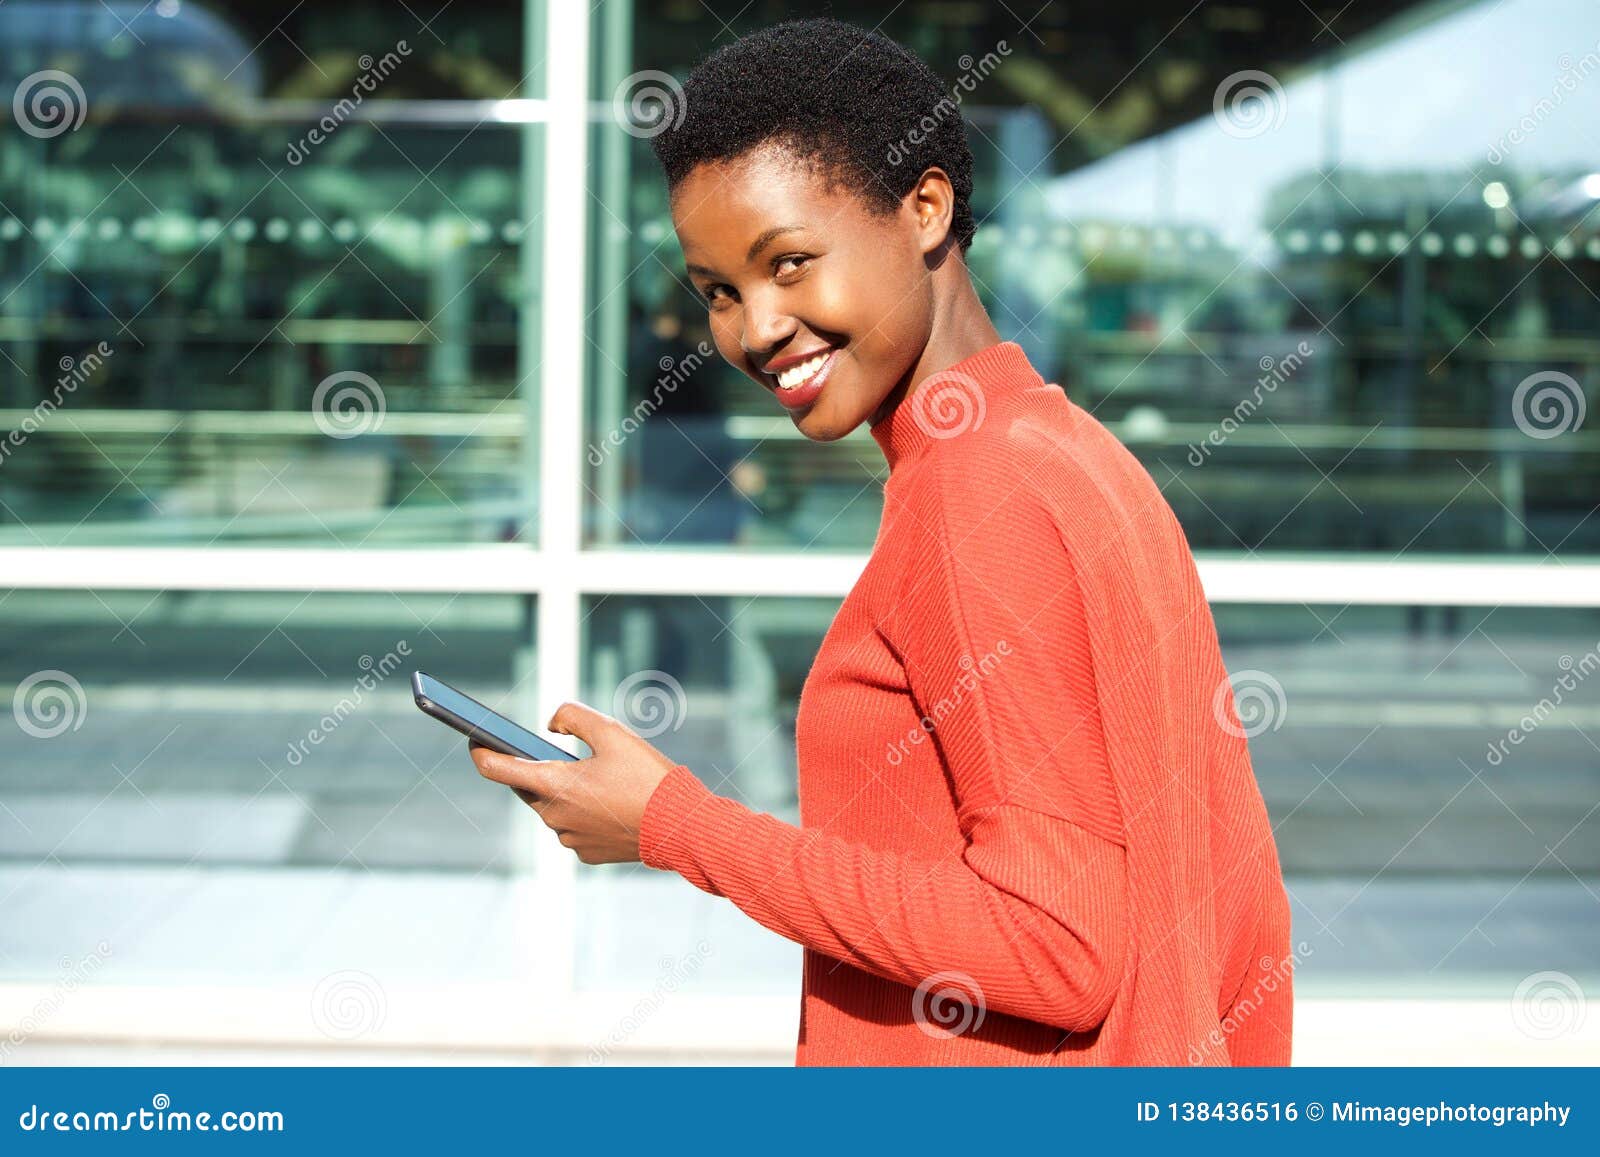 Beautiful Young African American Woman Holding Cellphone And Smiling